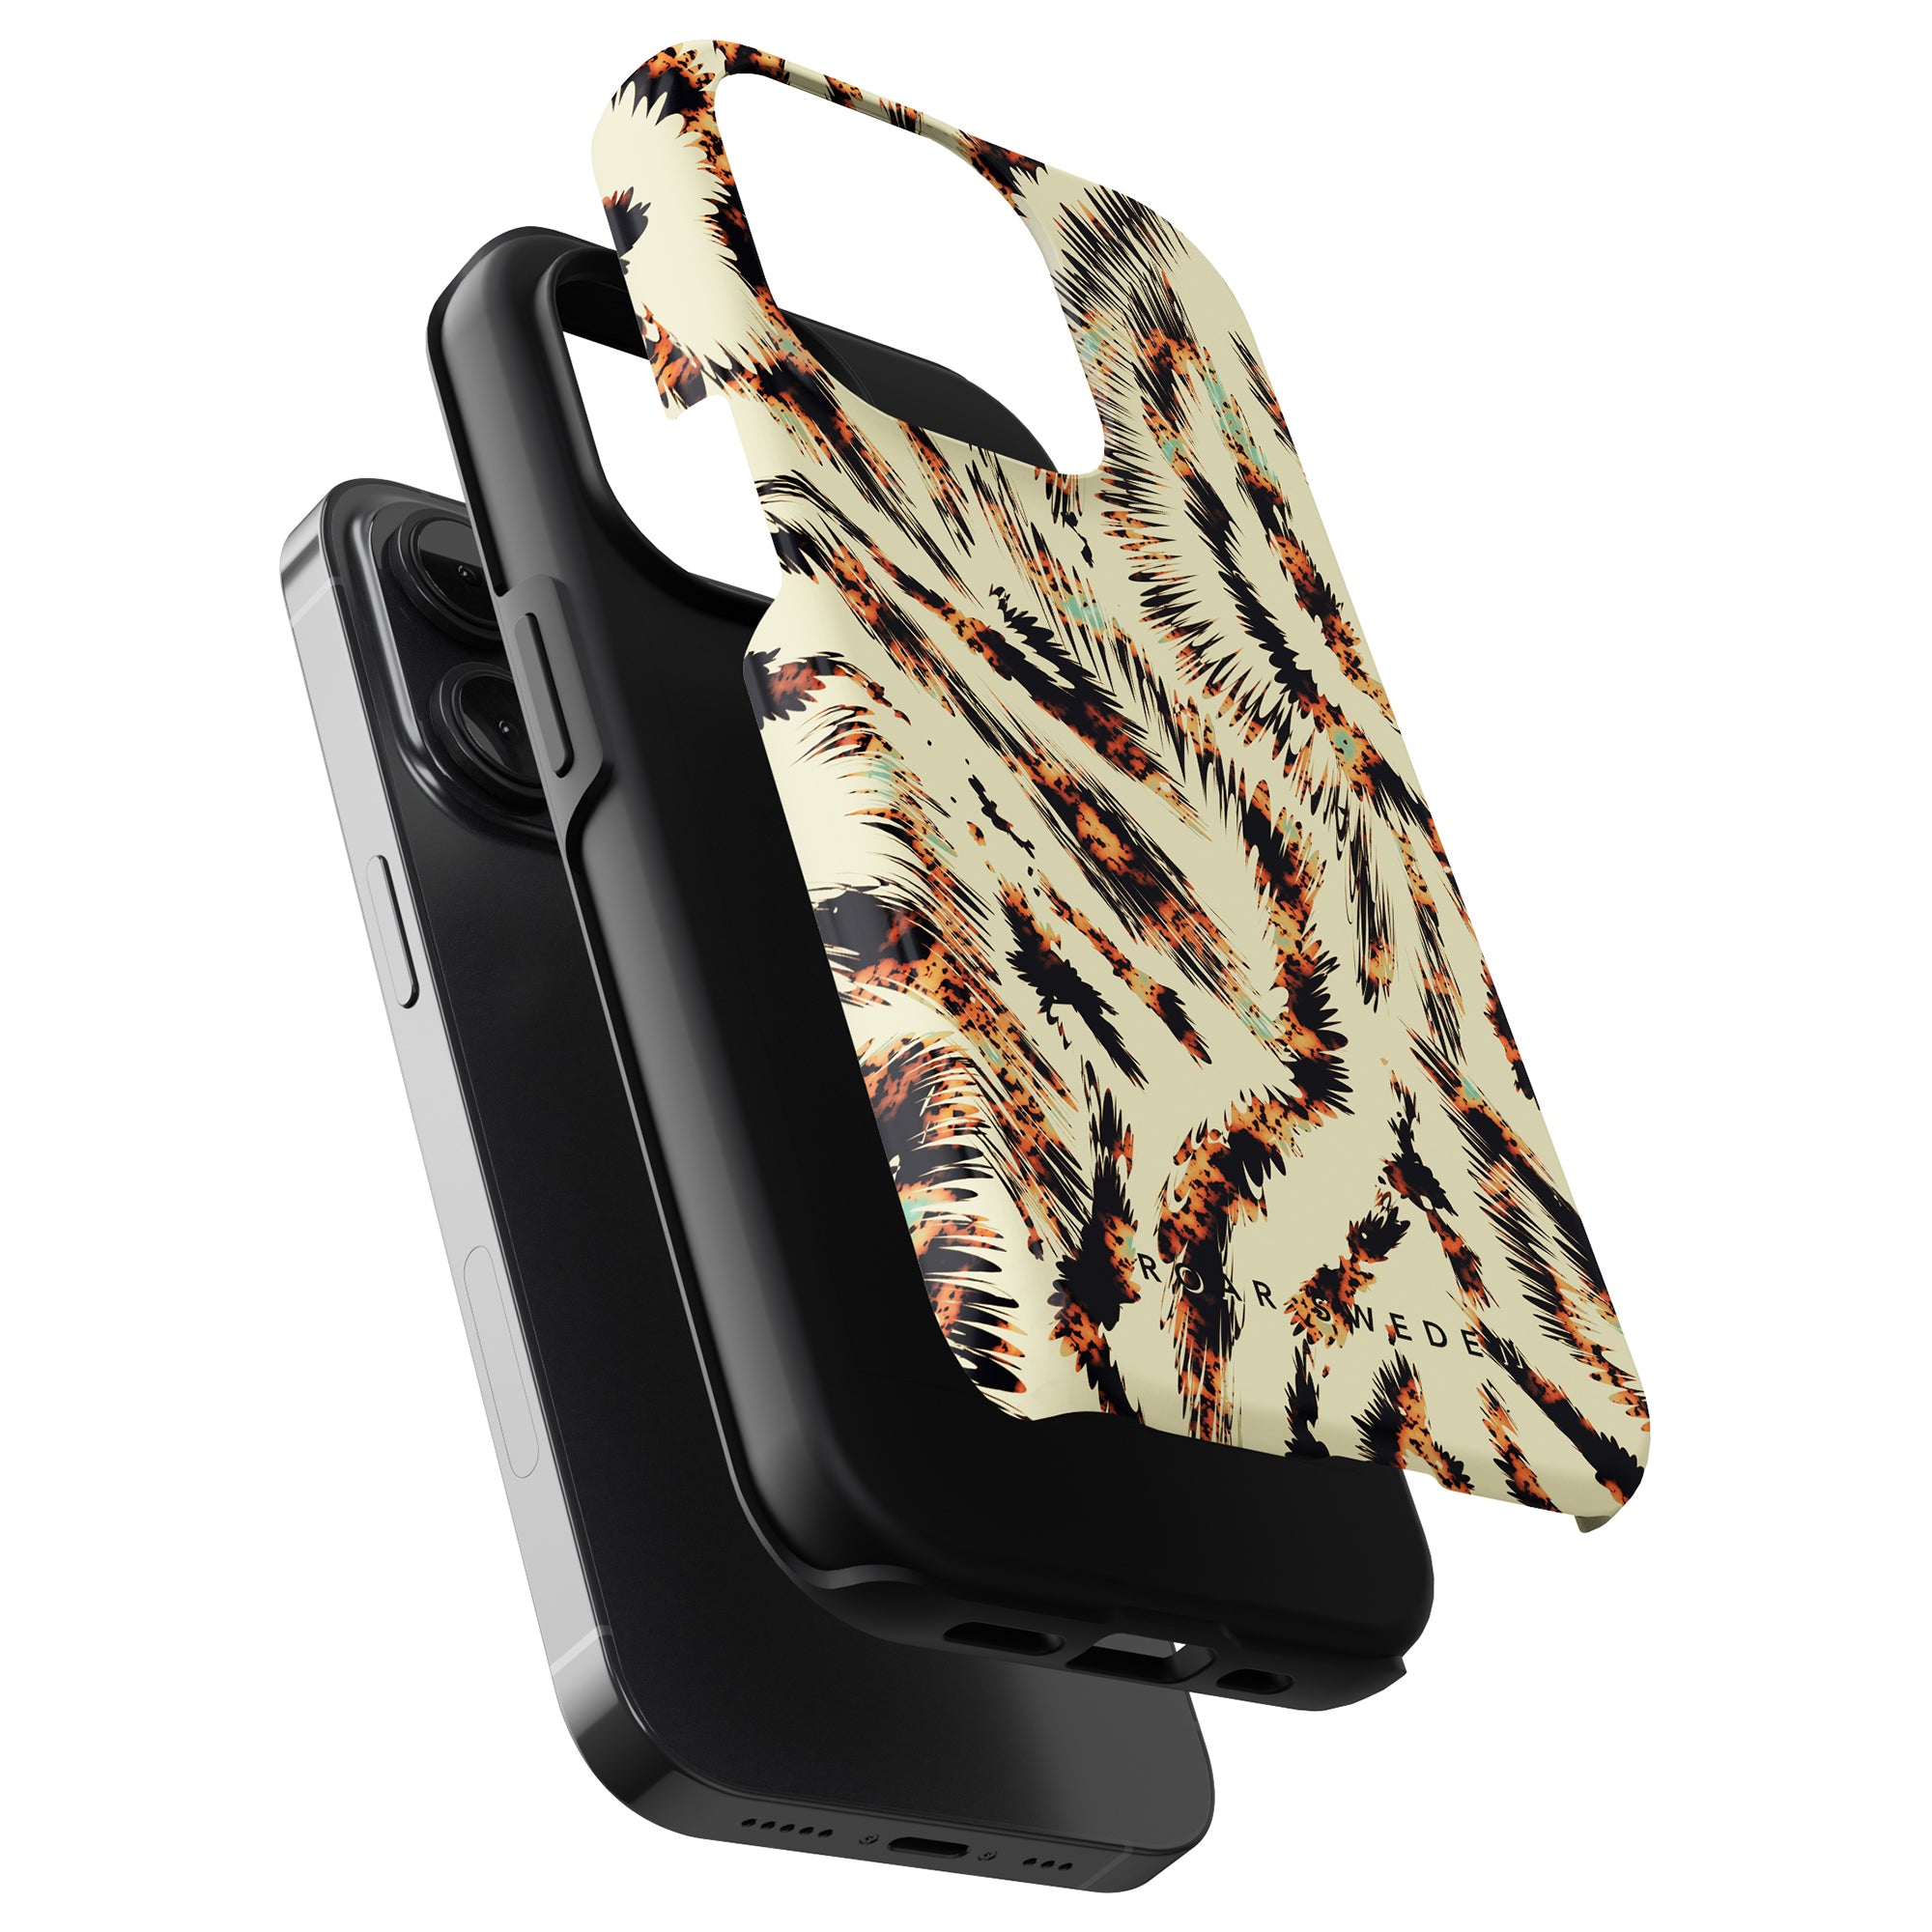 Enhance your iPhone 11 Pro with this striking tiger print Coco - Tough Case, designed to add a touch of wildness and style to your device. Crafted with precision, this sleek case offers reliable